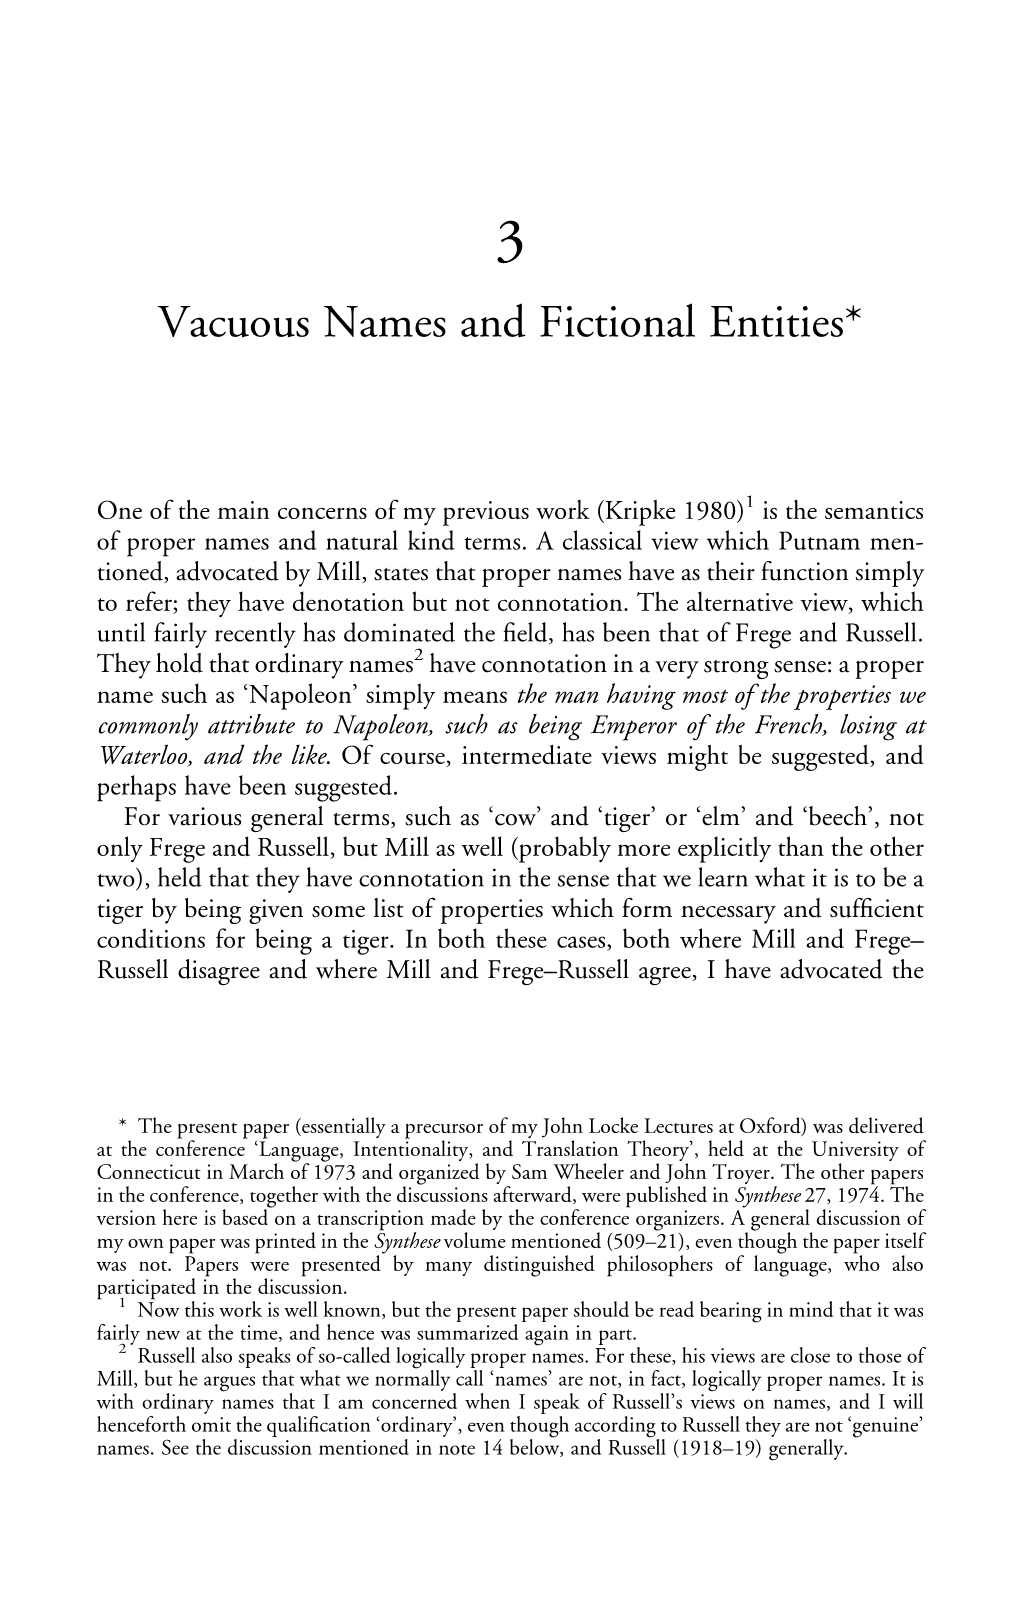 Vacuous Names and Fictional Entities*